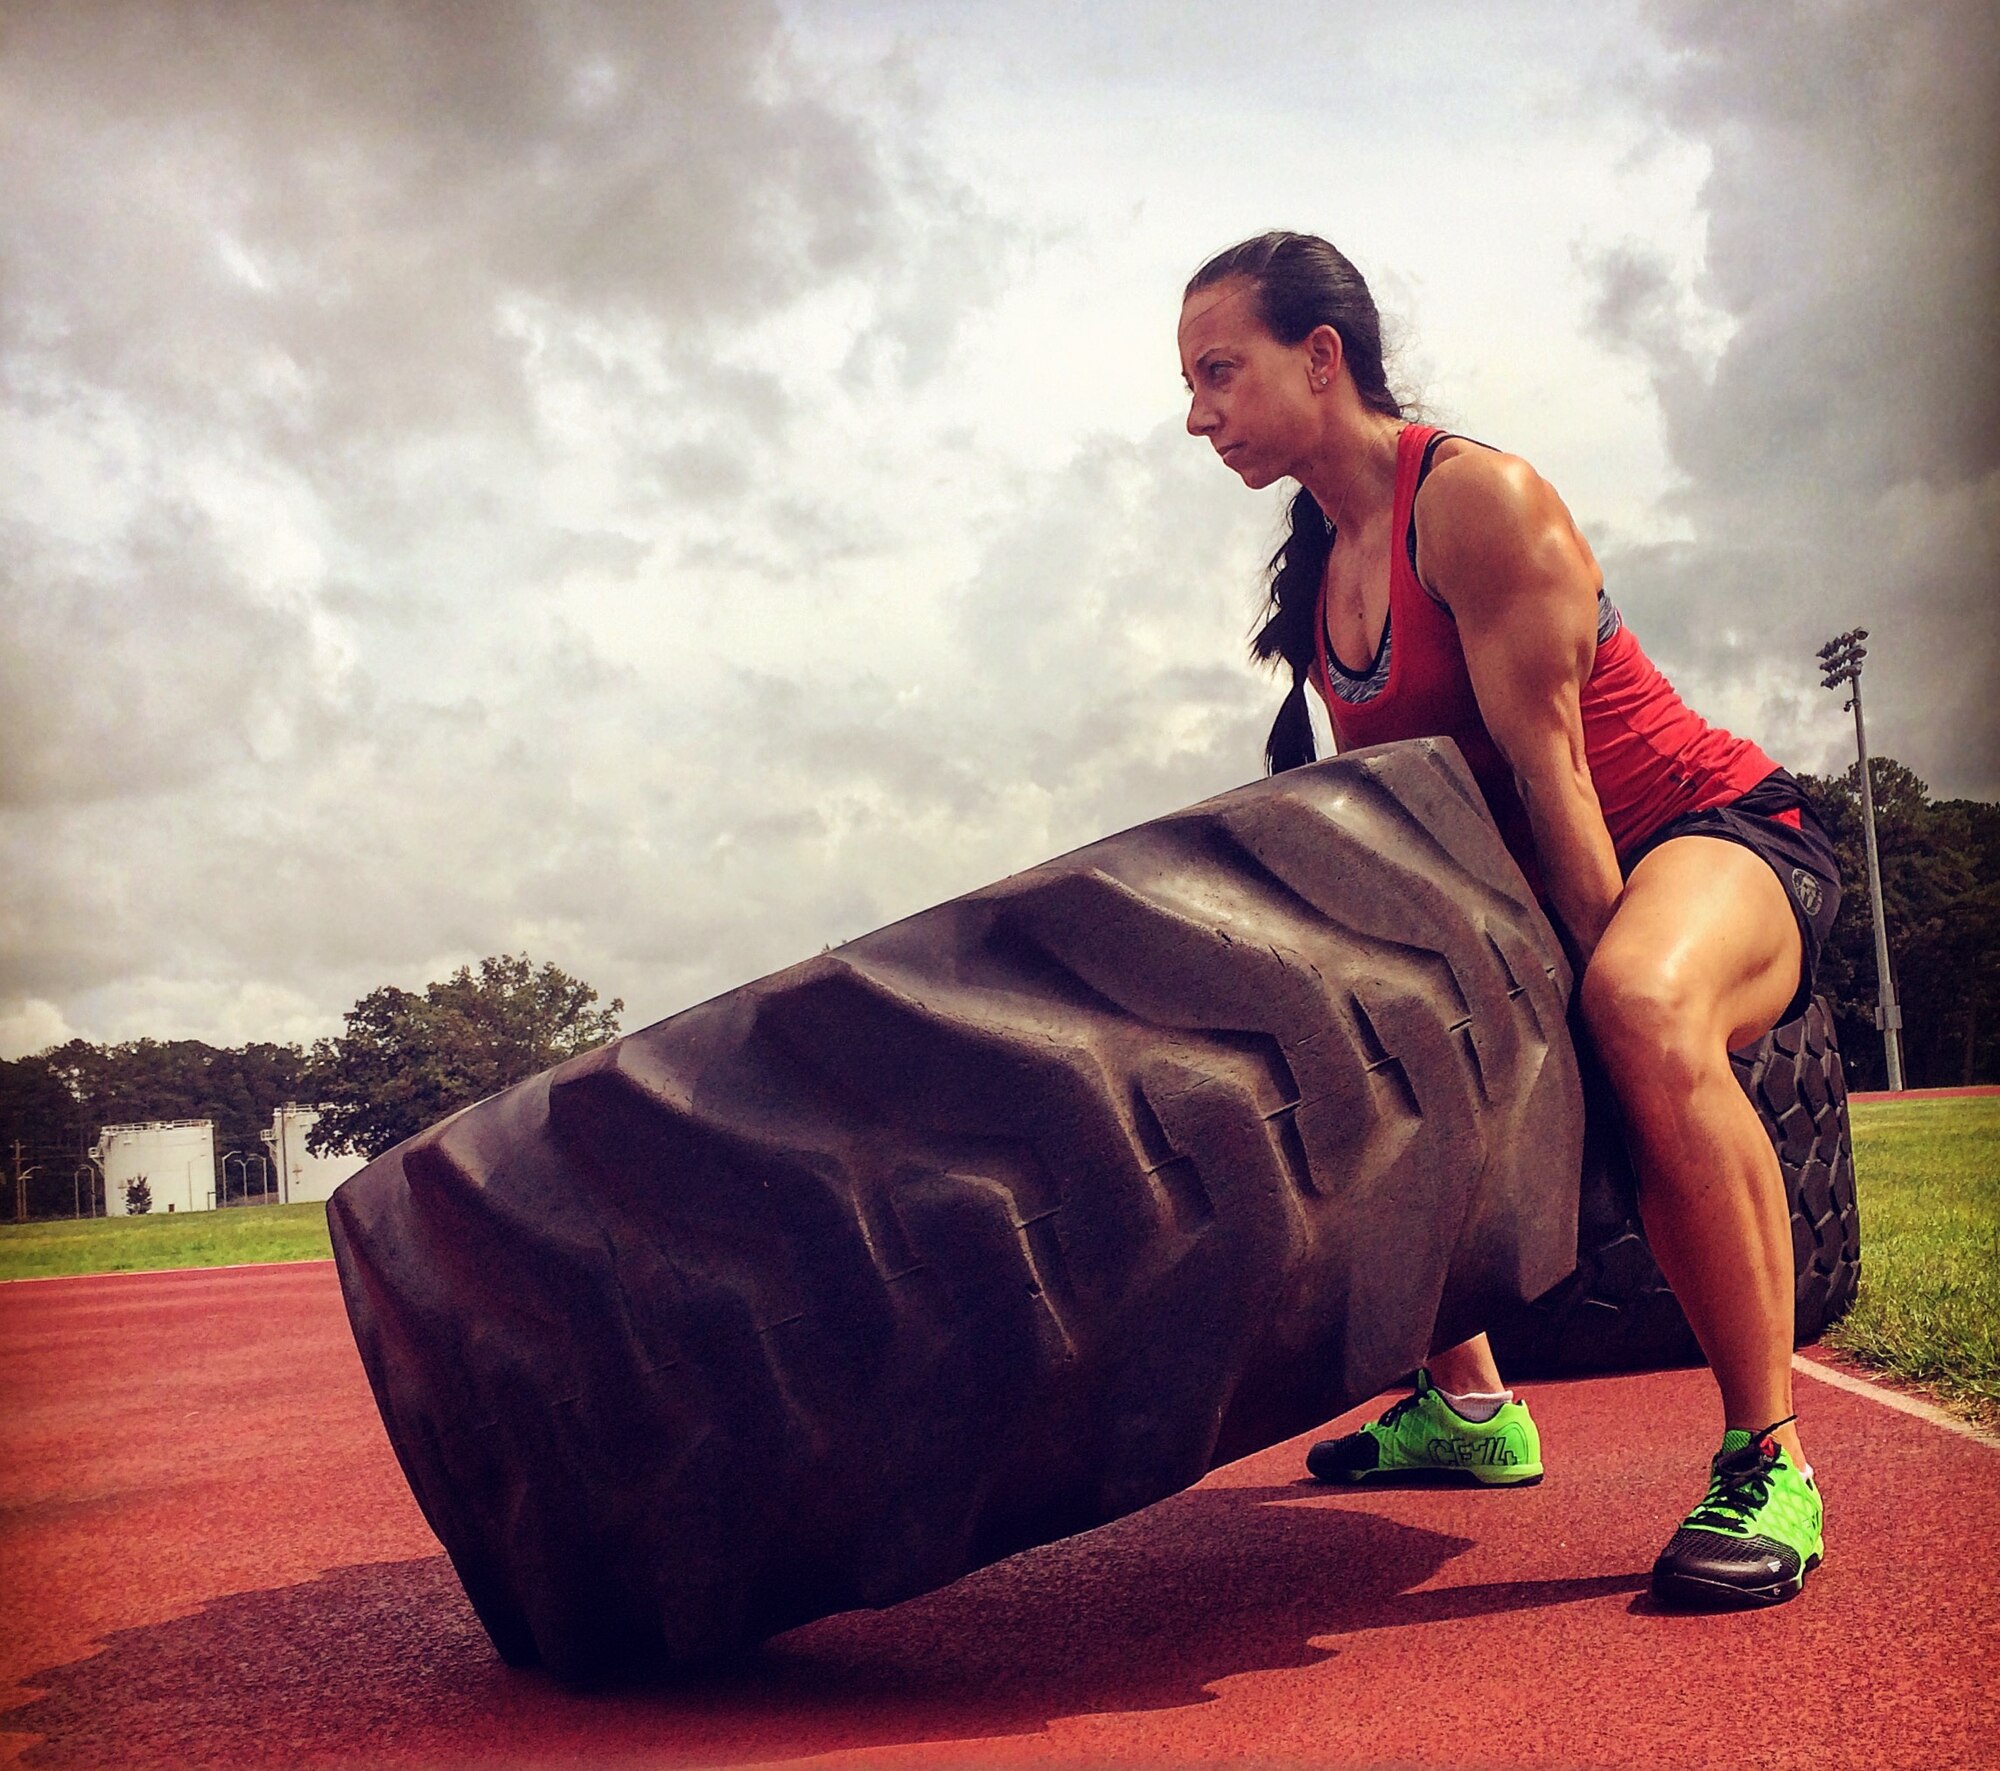 Capt. Leslie Newton, 4th Fighter Wing special victim’s counselor, lifts a tire during a workout, Sept. 6, 2015, at Seymour Johnson Air Force Base, North Carolina. During her early years as a competitive athlete, Newton blew her knees four times, but even now strives to better herself at the gym. (Courtesy photo)